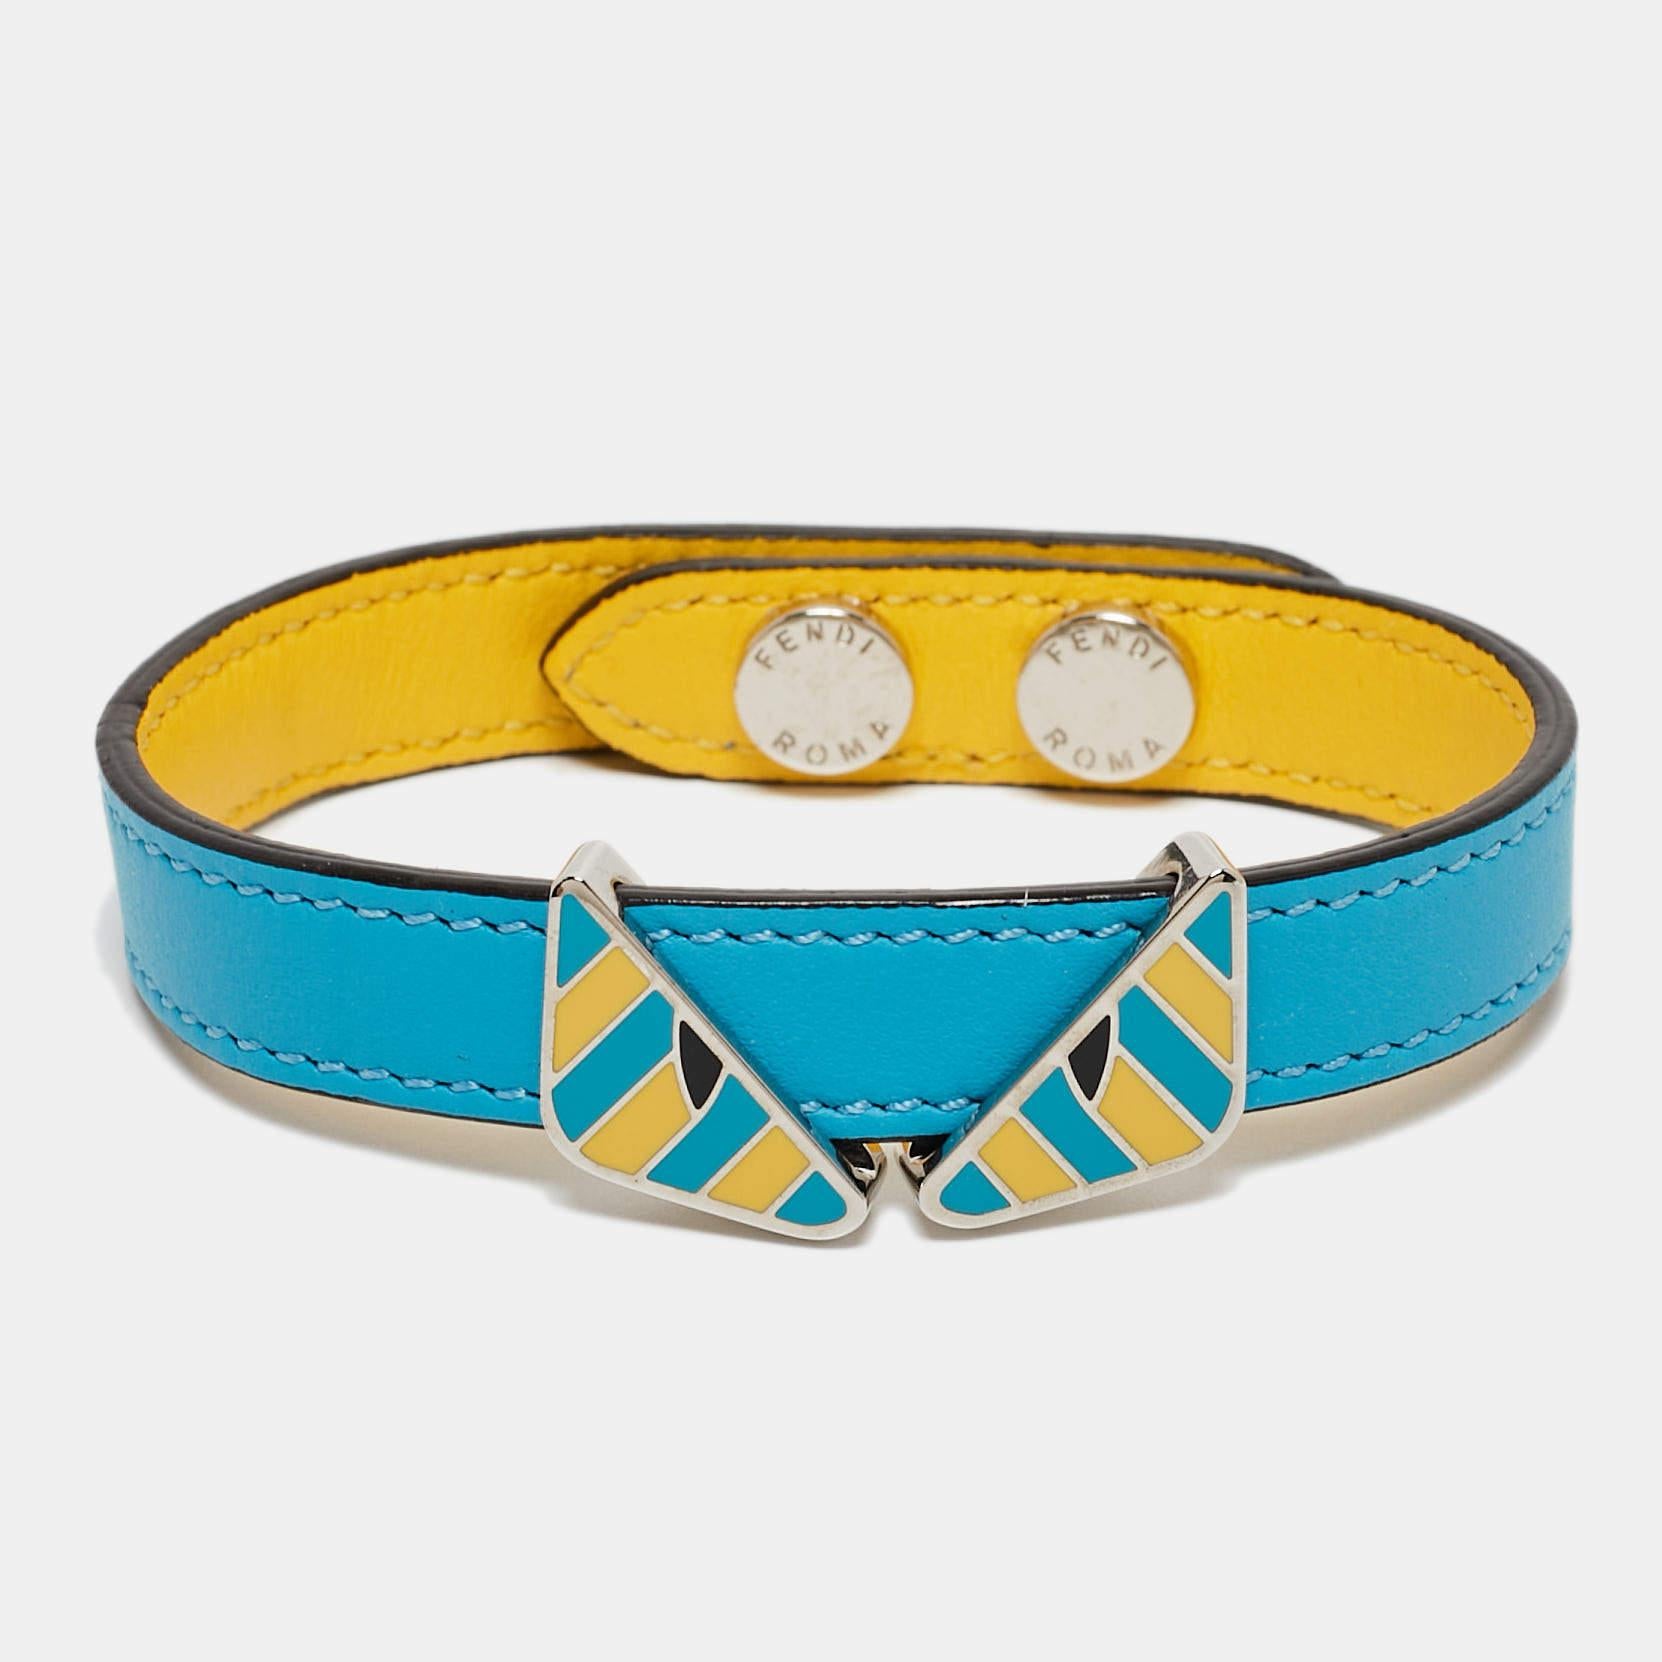 Accessories that are high on style are worth the buy, such as this wrap bracelet by Fendi. It is crafted from bi-colored leather and carries enamel-detailed monster eyes.

